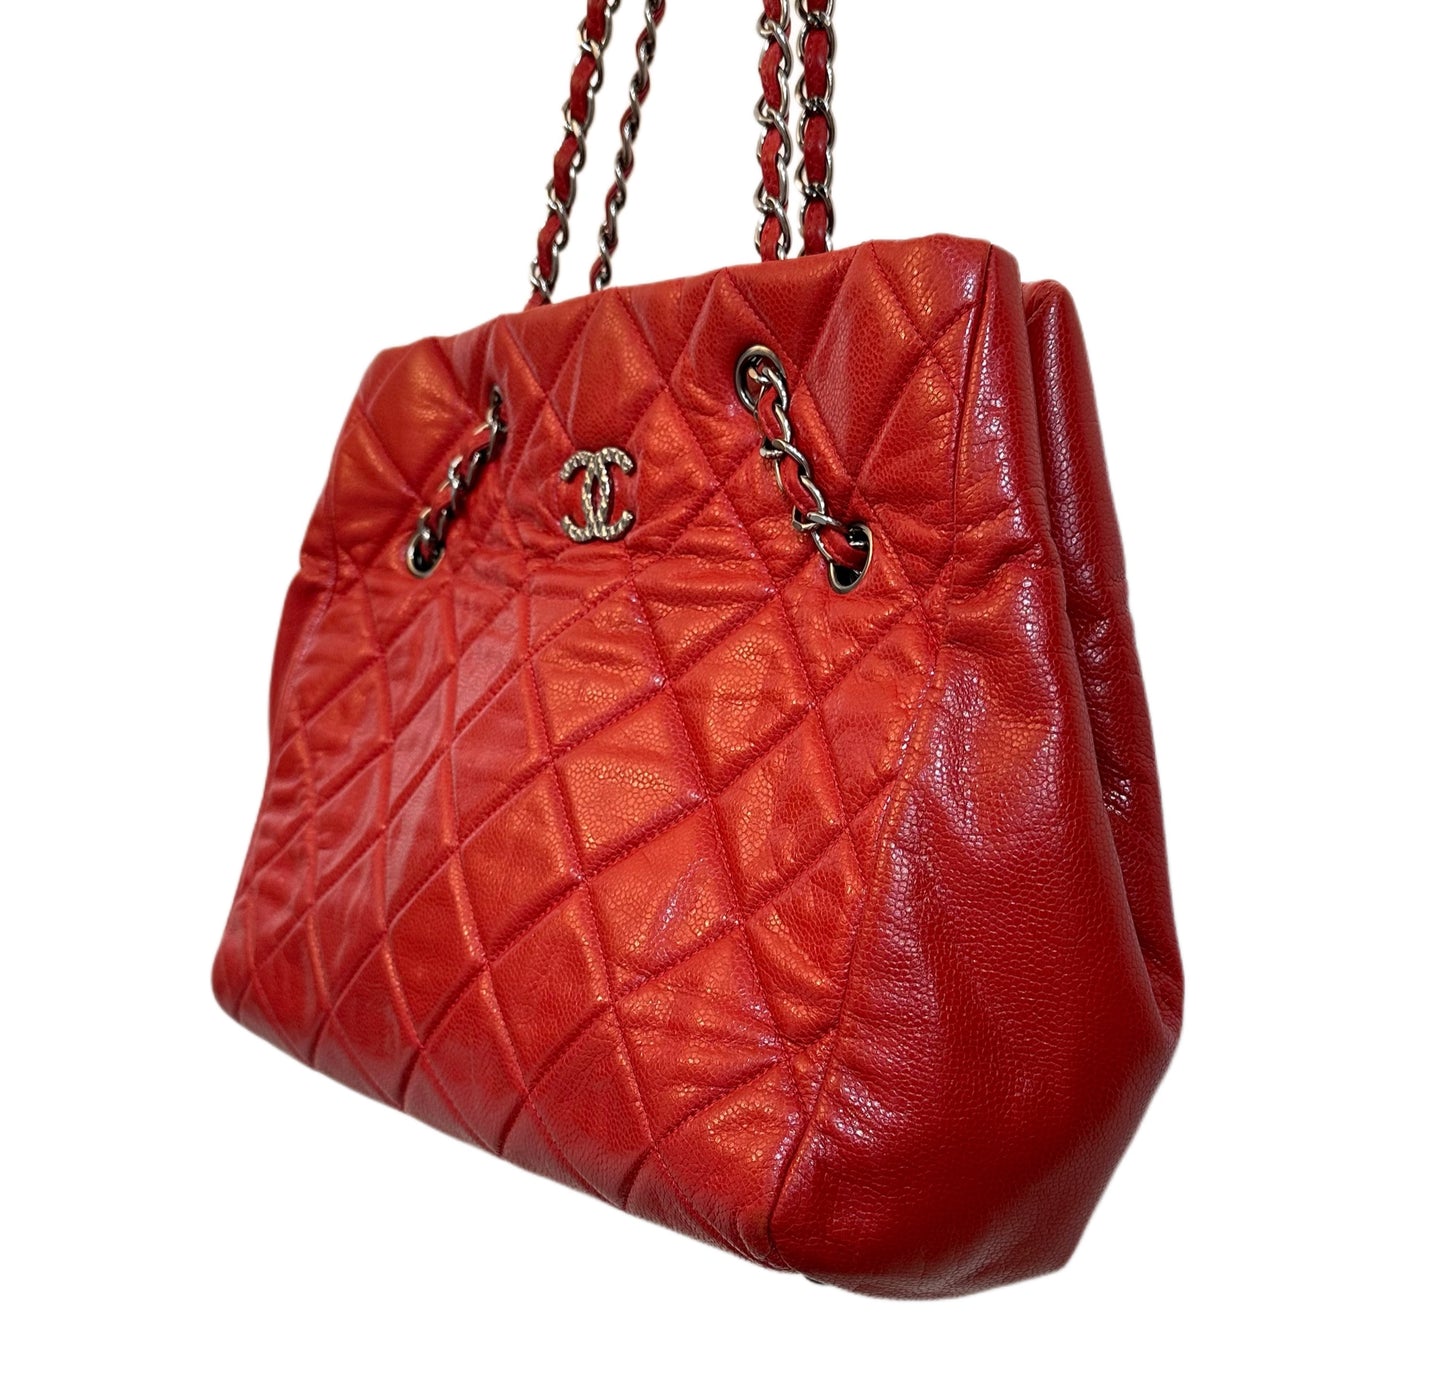 CHANEL Large Quilted Tote Bag, Red